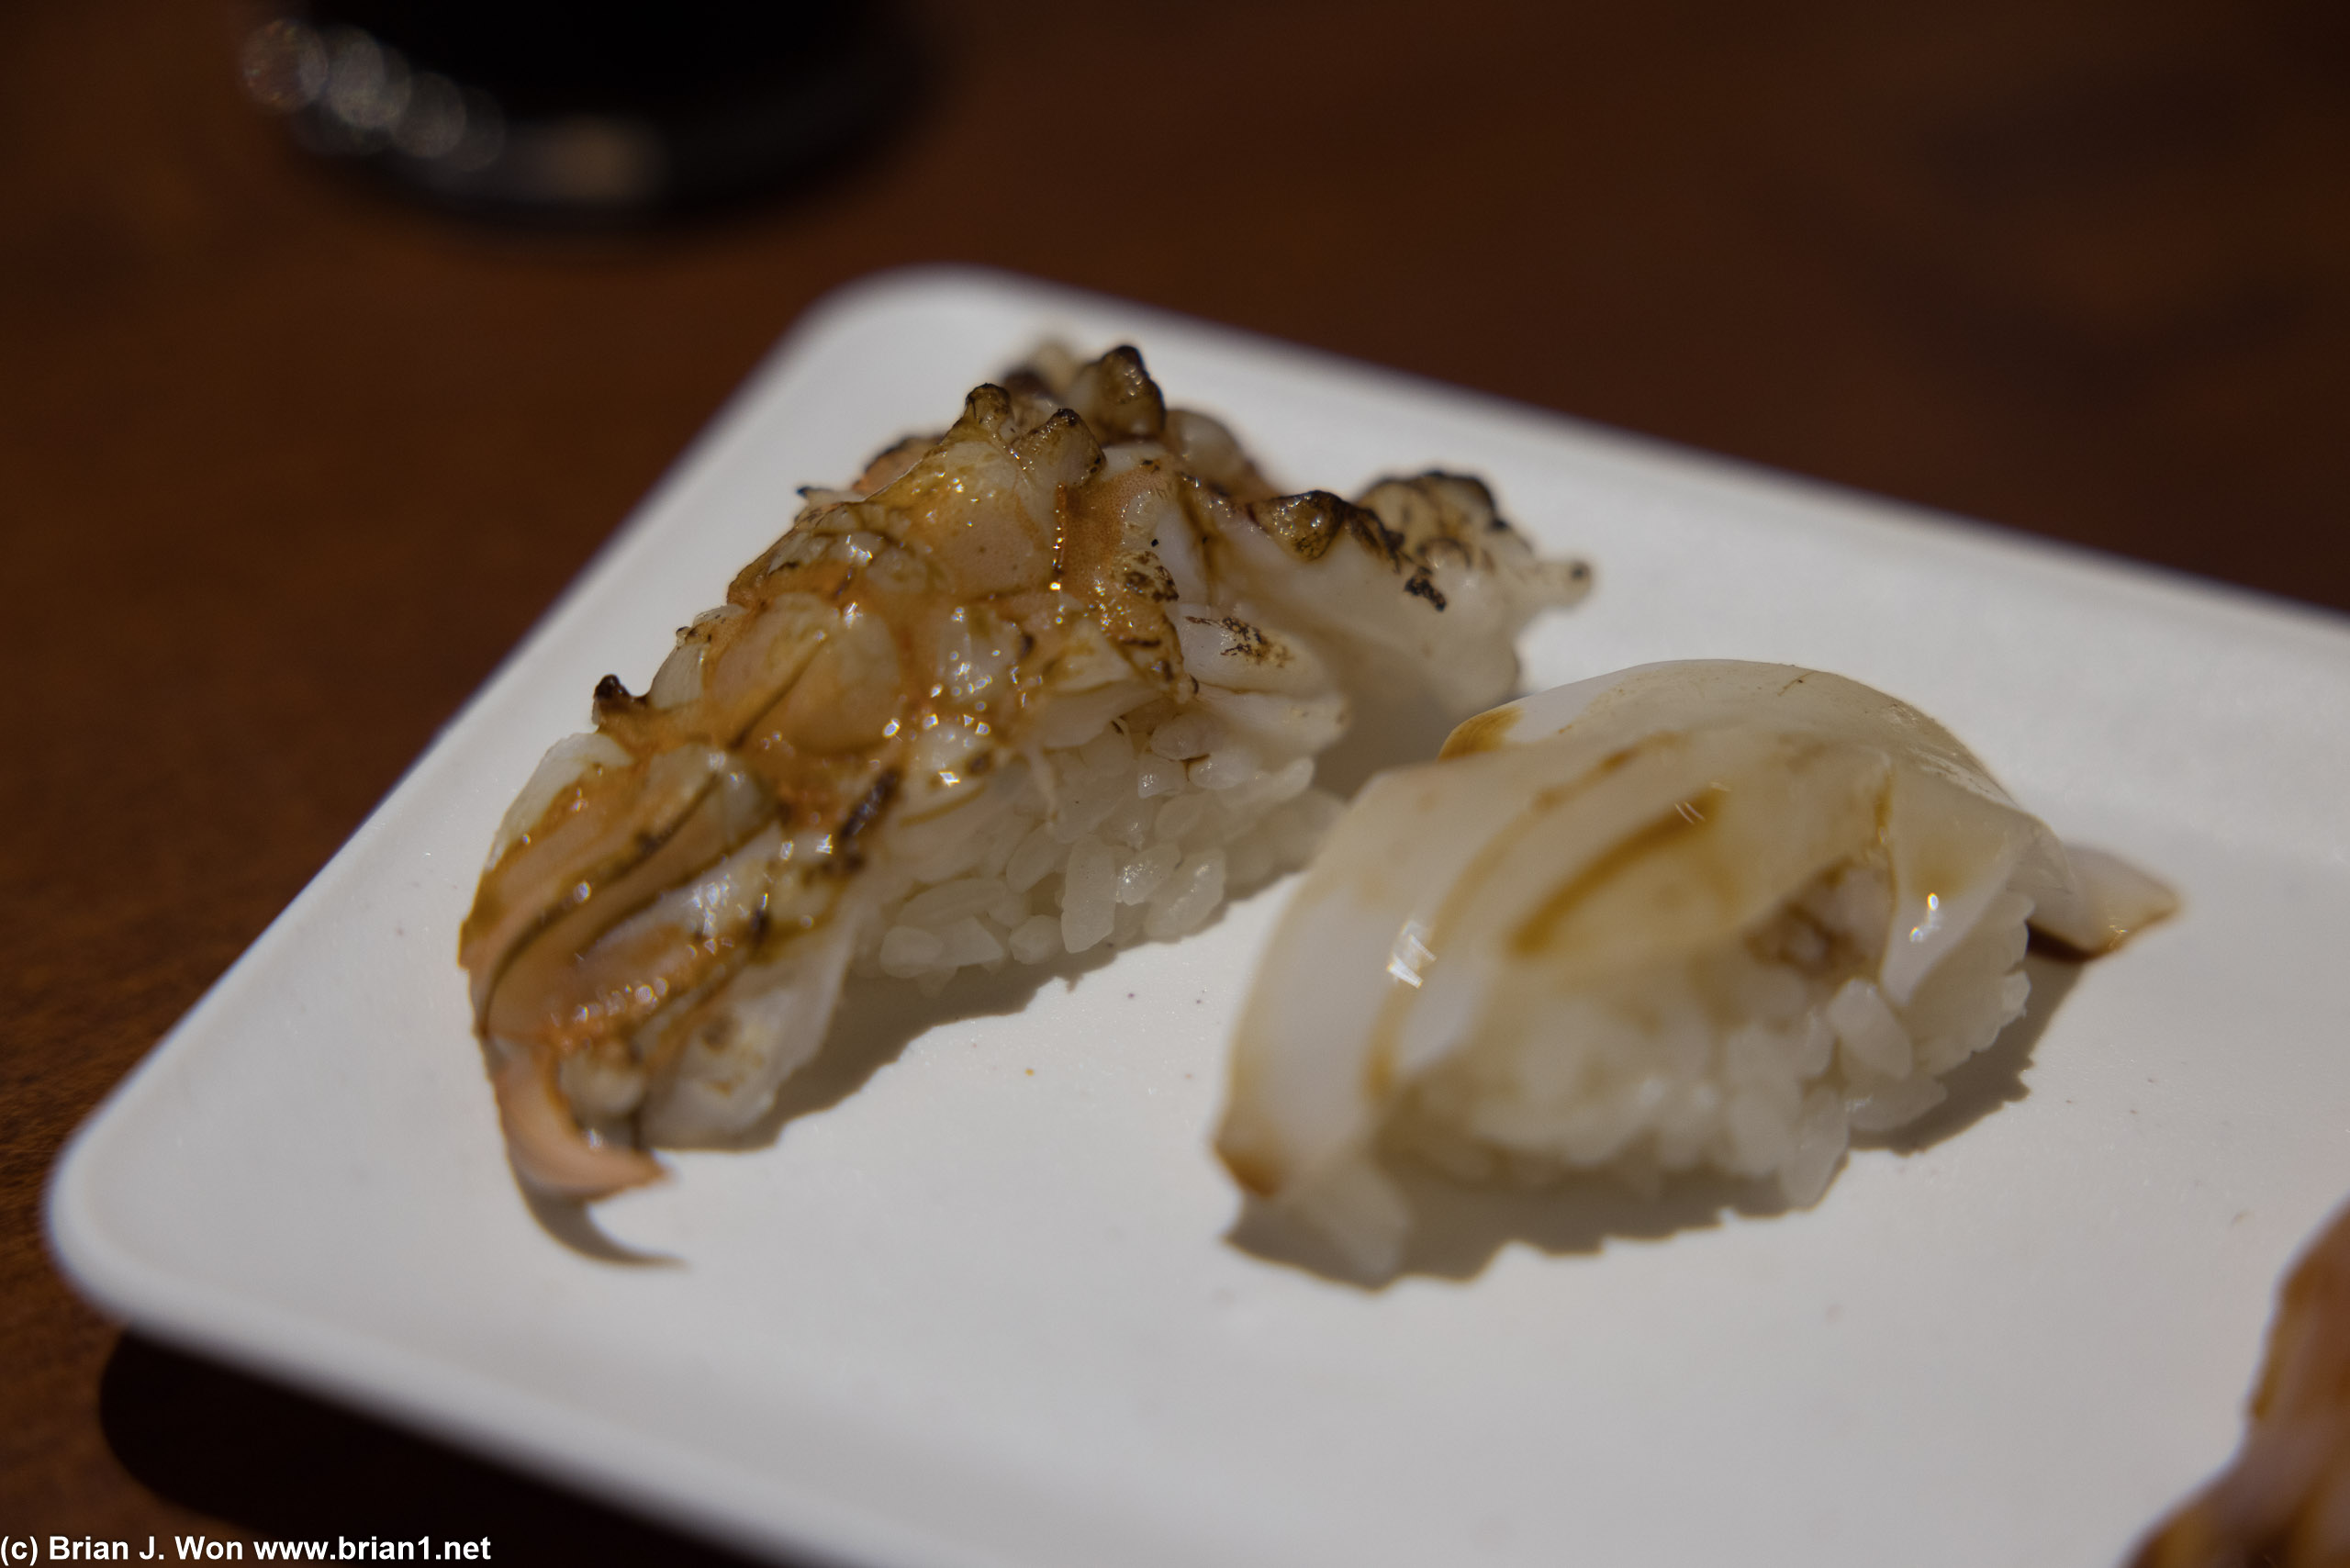 Mexican tiger shrimp, Japanese blue king squid (ika).